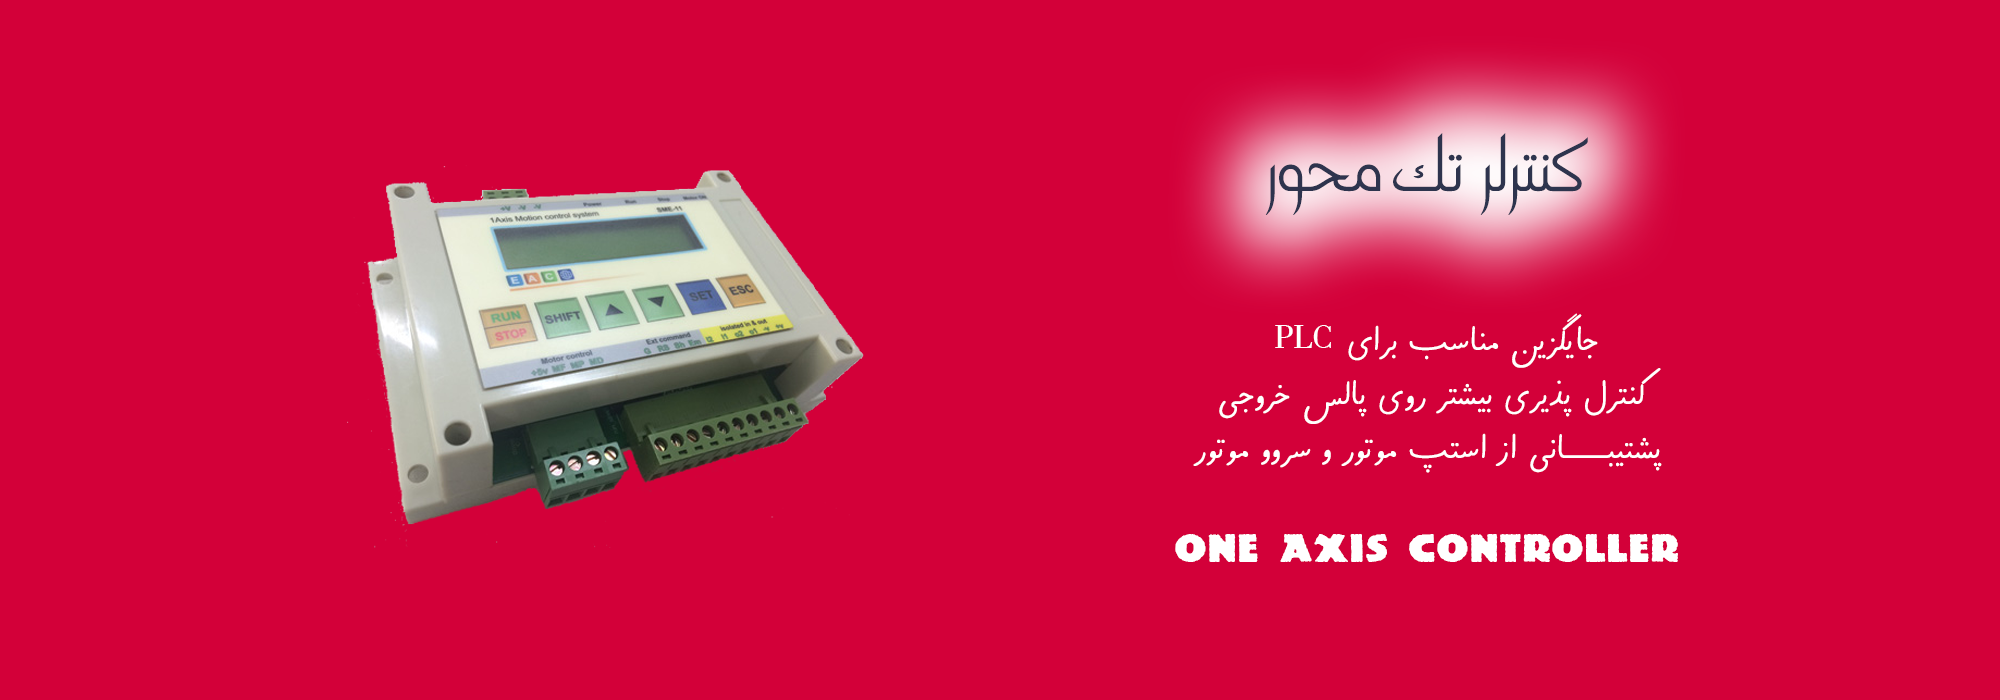 One Axis Controller